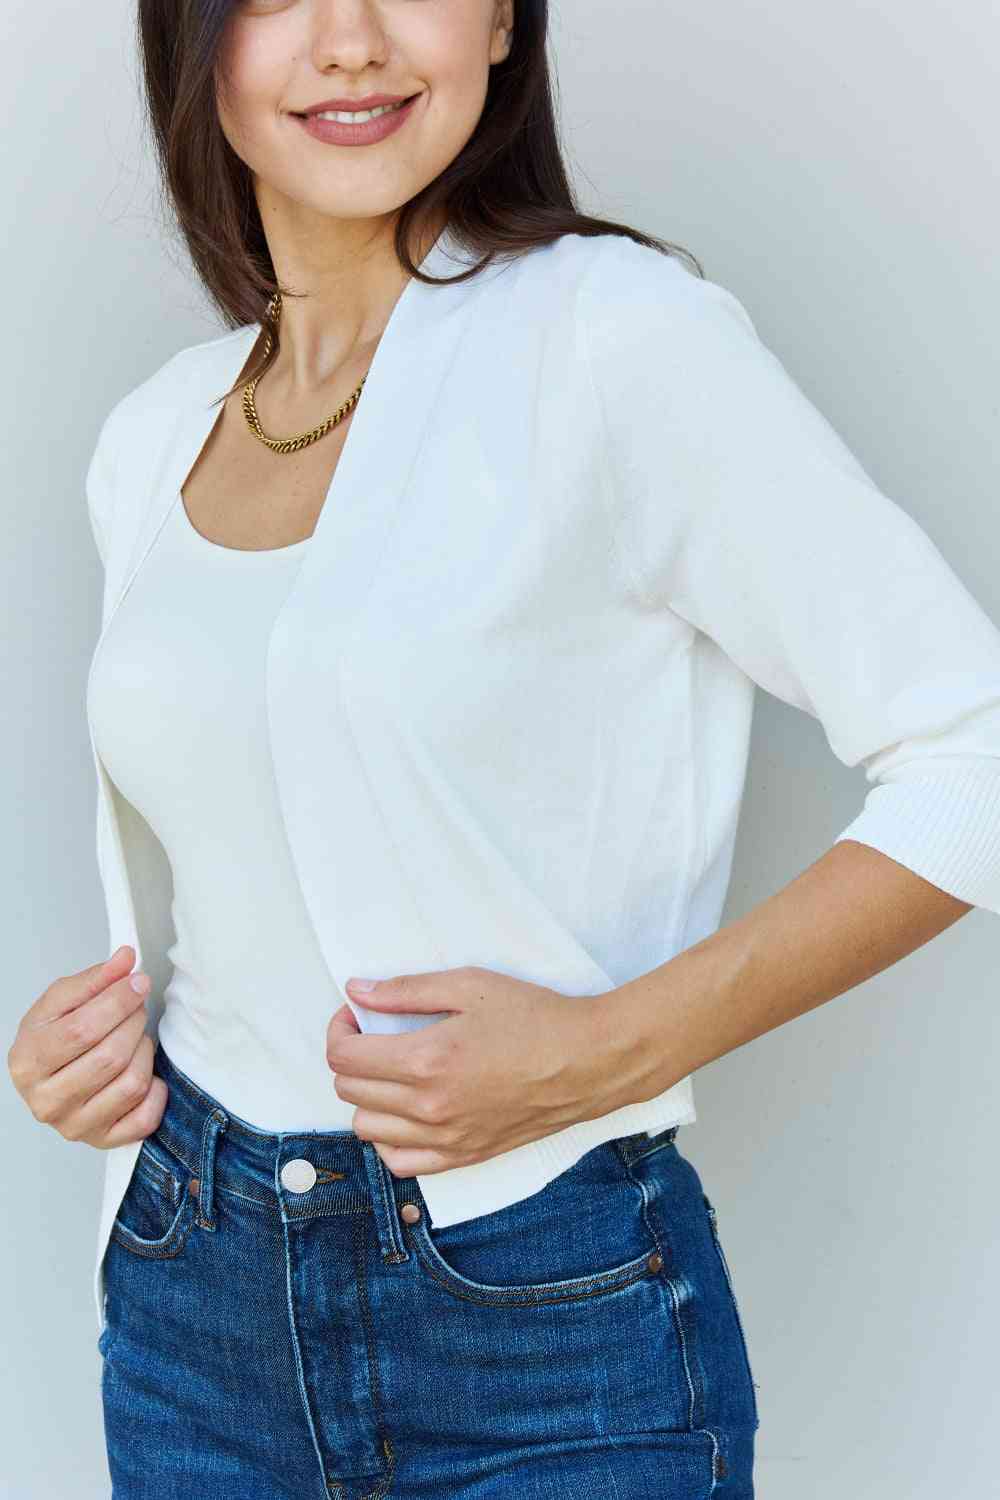 Doublju My Favorite Full Size 3/4 Sleeve Cropped Cardigan in Ivory - Everyday-Sales.com